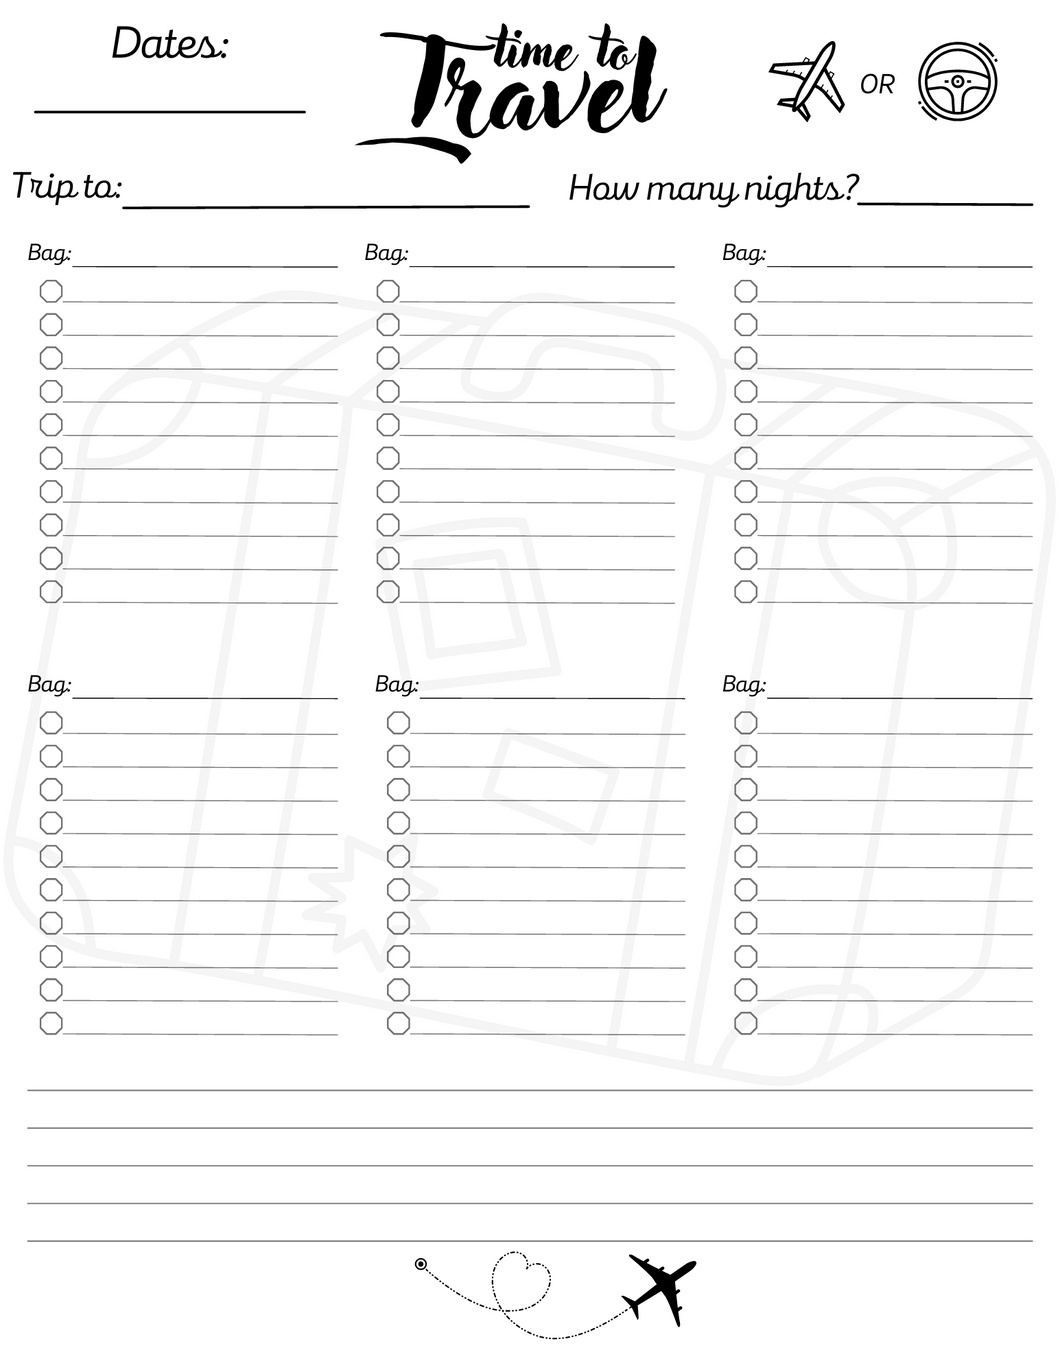 Printable Packing/Travel list with Suitcase & 6 bag lists - Digital download